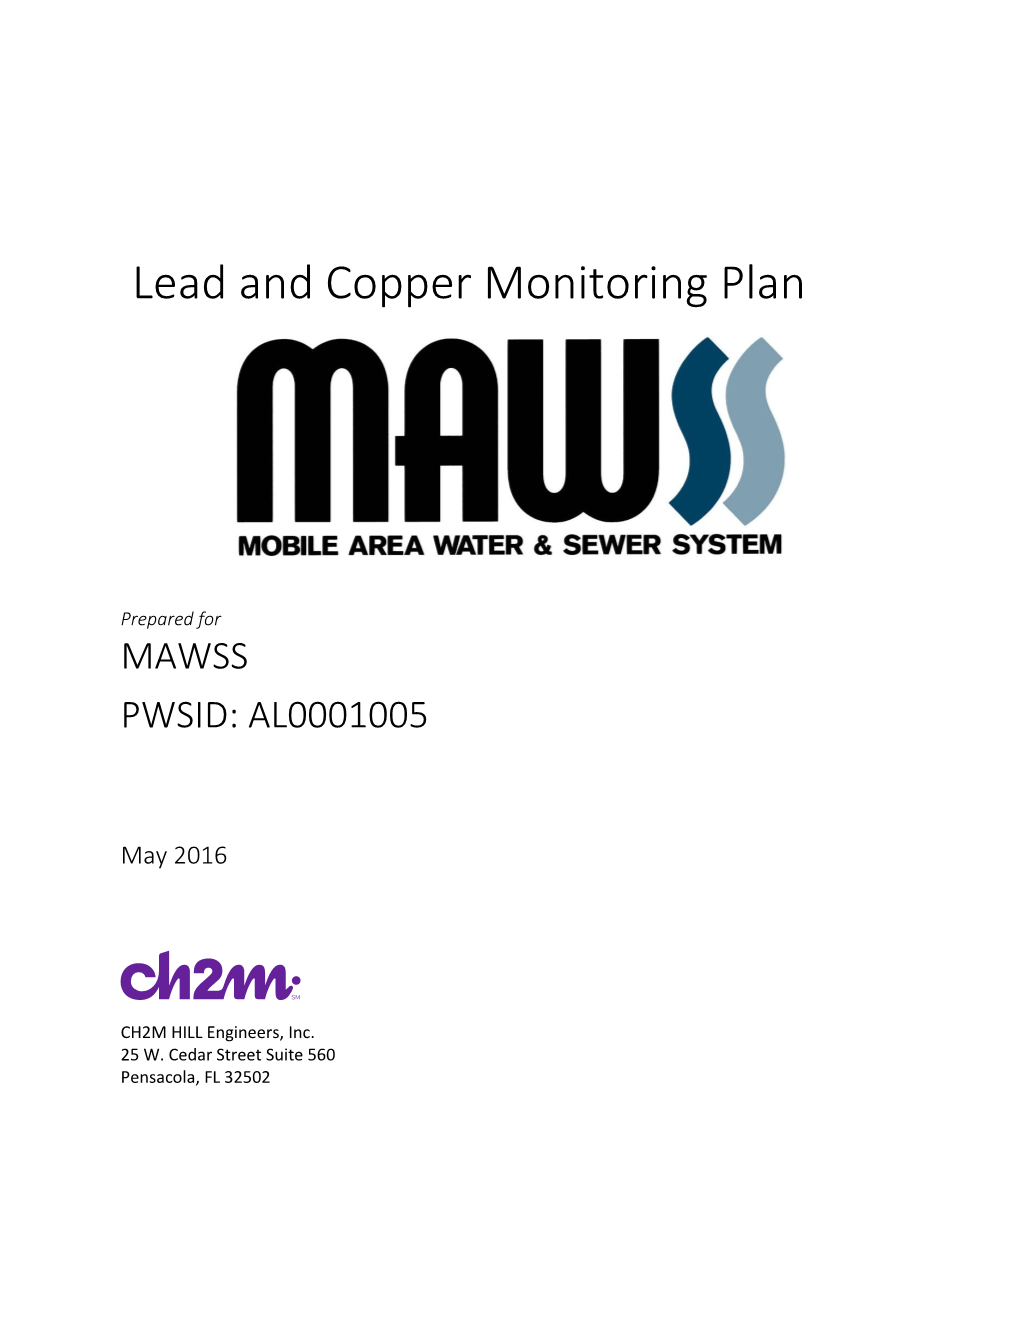 Lead and Copper Monitoring Plan